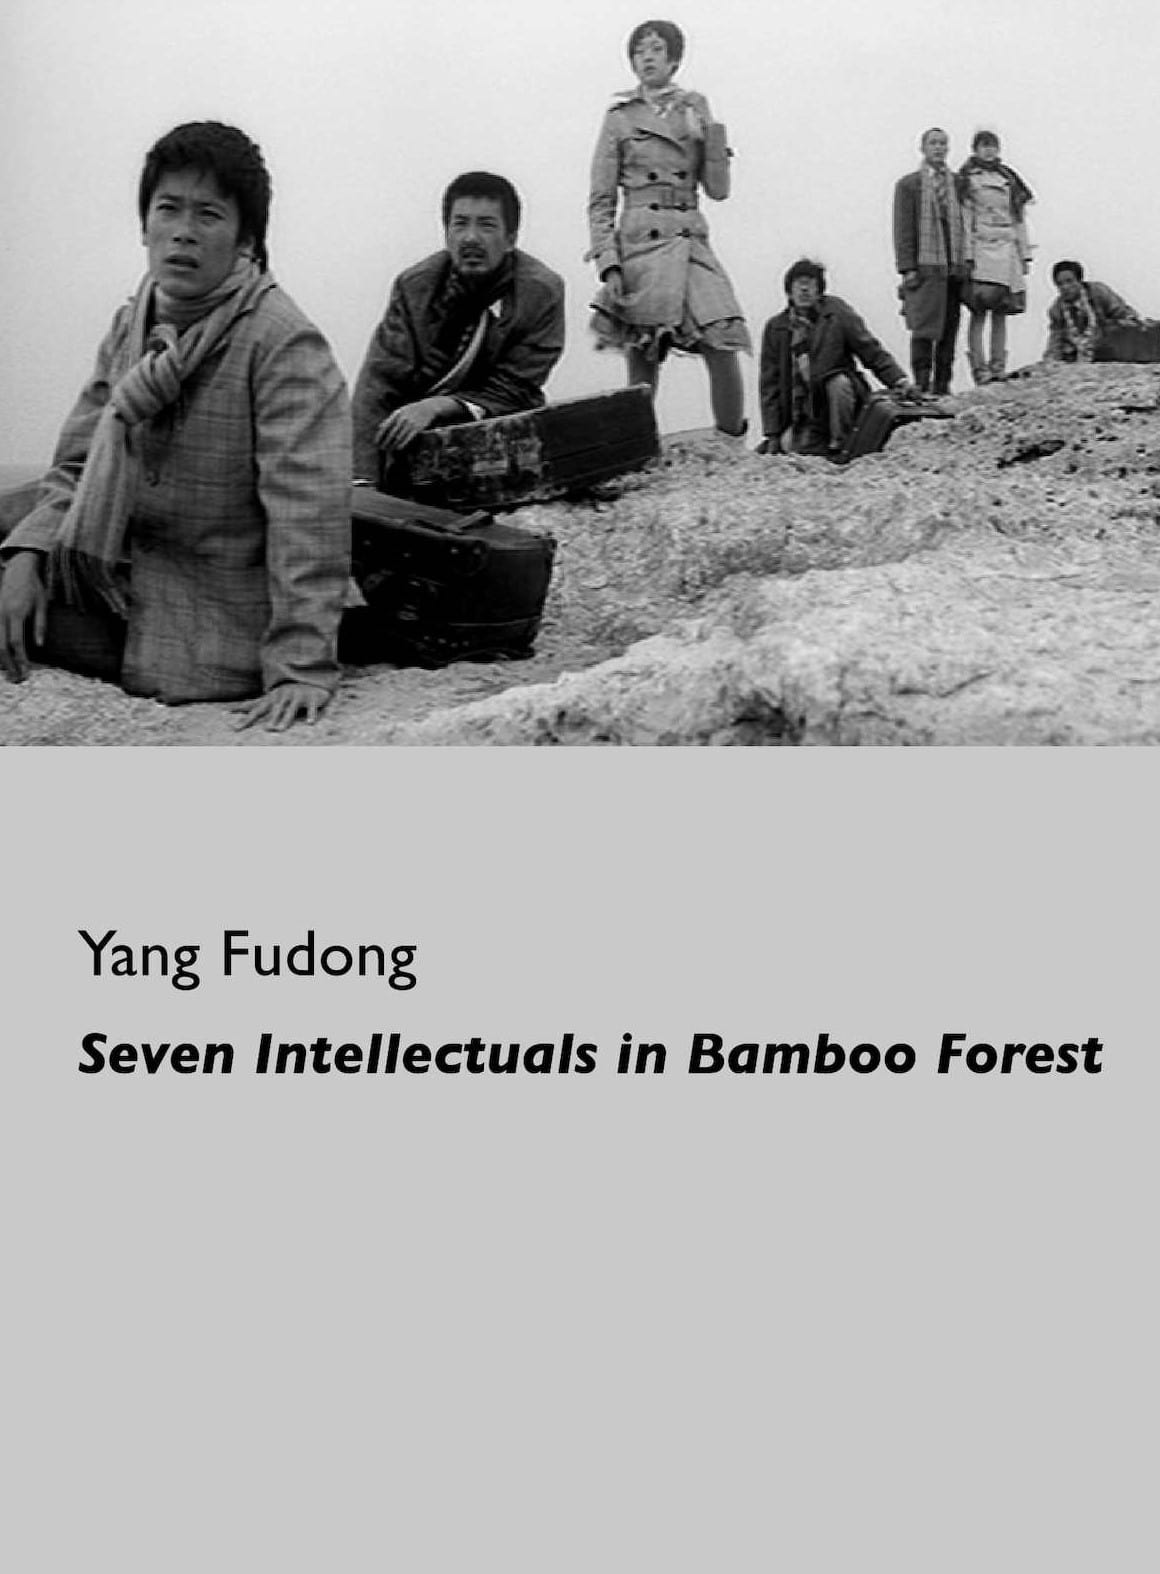 Seven Intellectuals in Bamboo Forest, Part IV